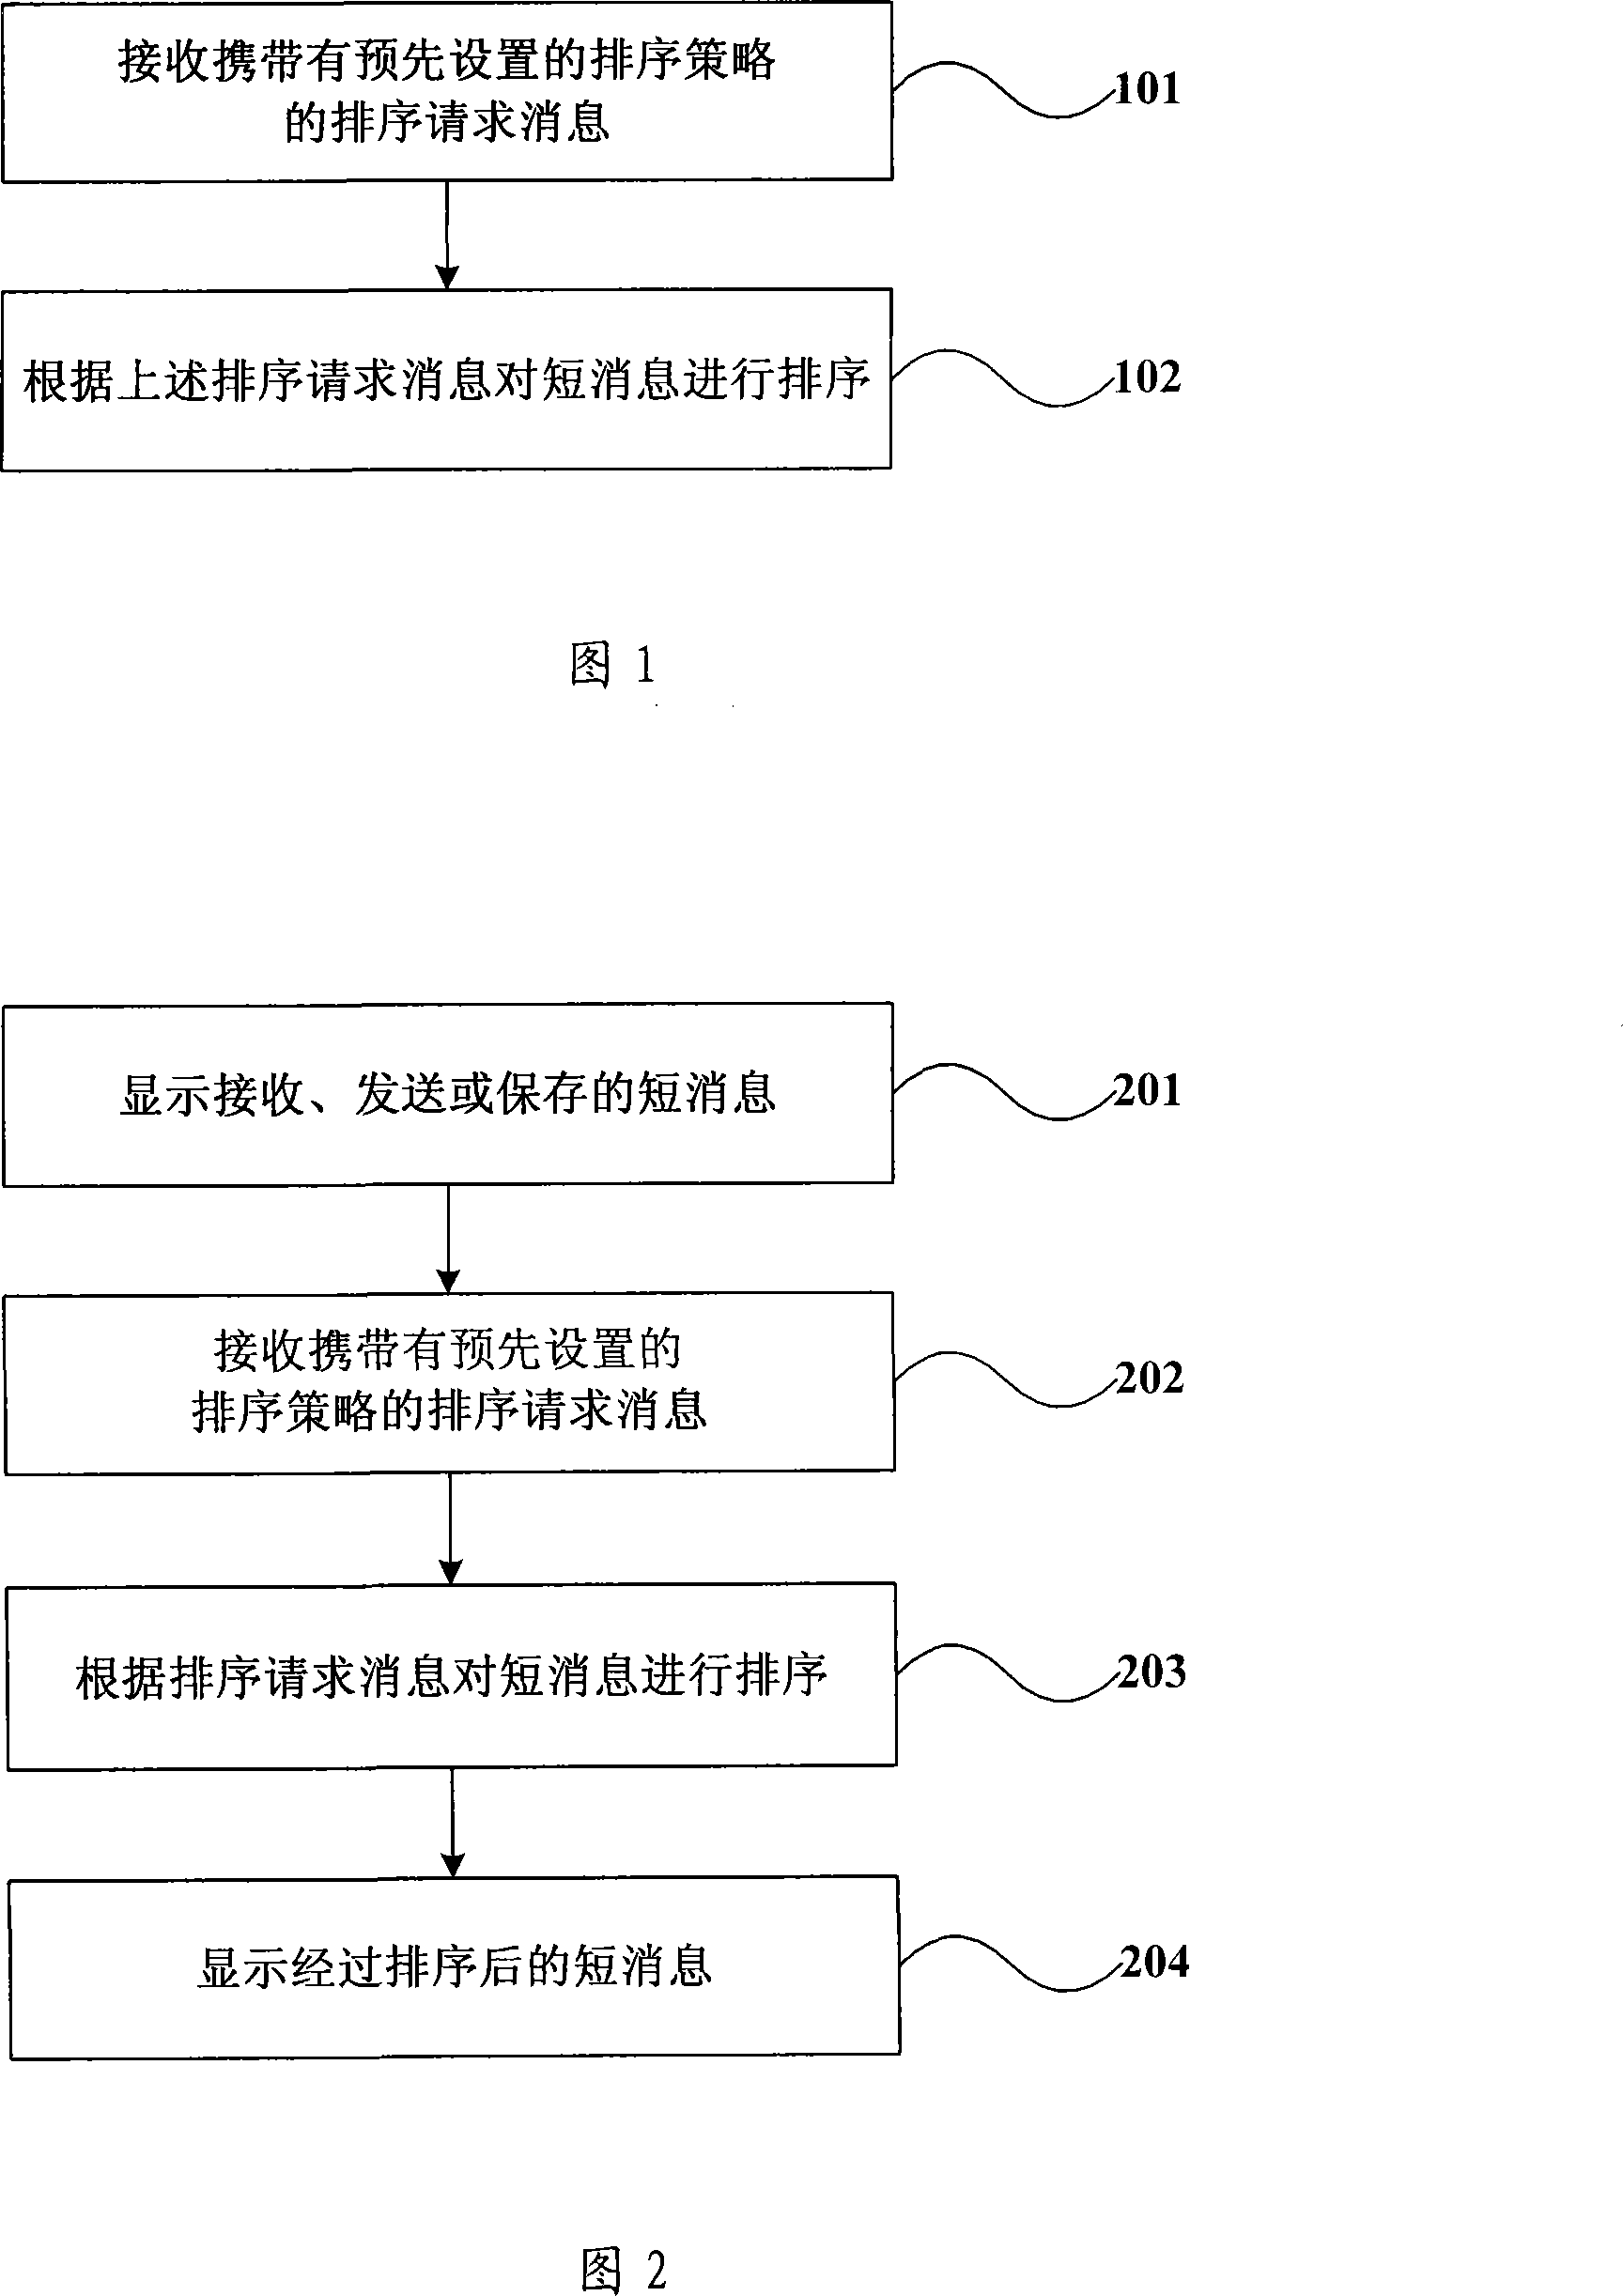 Short message processing method and mobile terminal